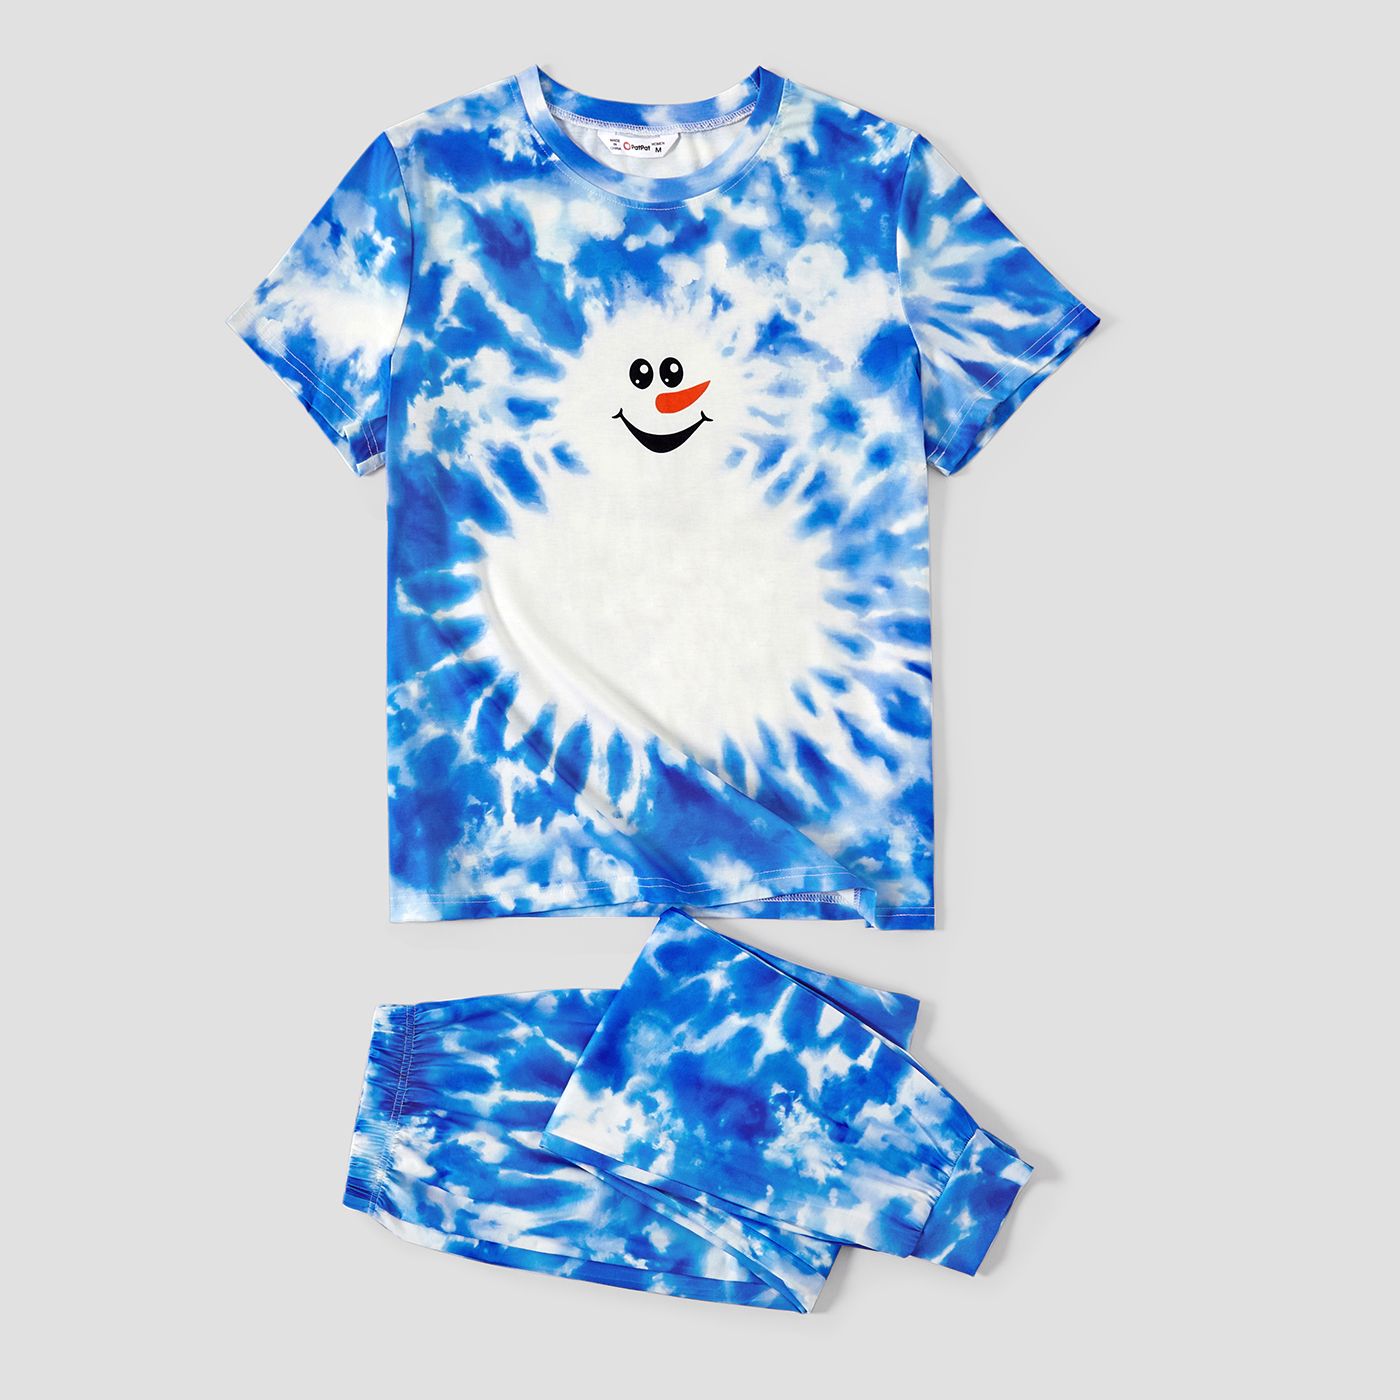 Christmas Family Matching Snowman Print  Blue Tie-dye Short-sleeve Pajamas Sets (Flame Resistant)